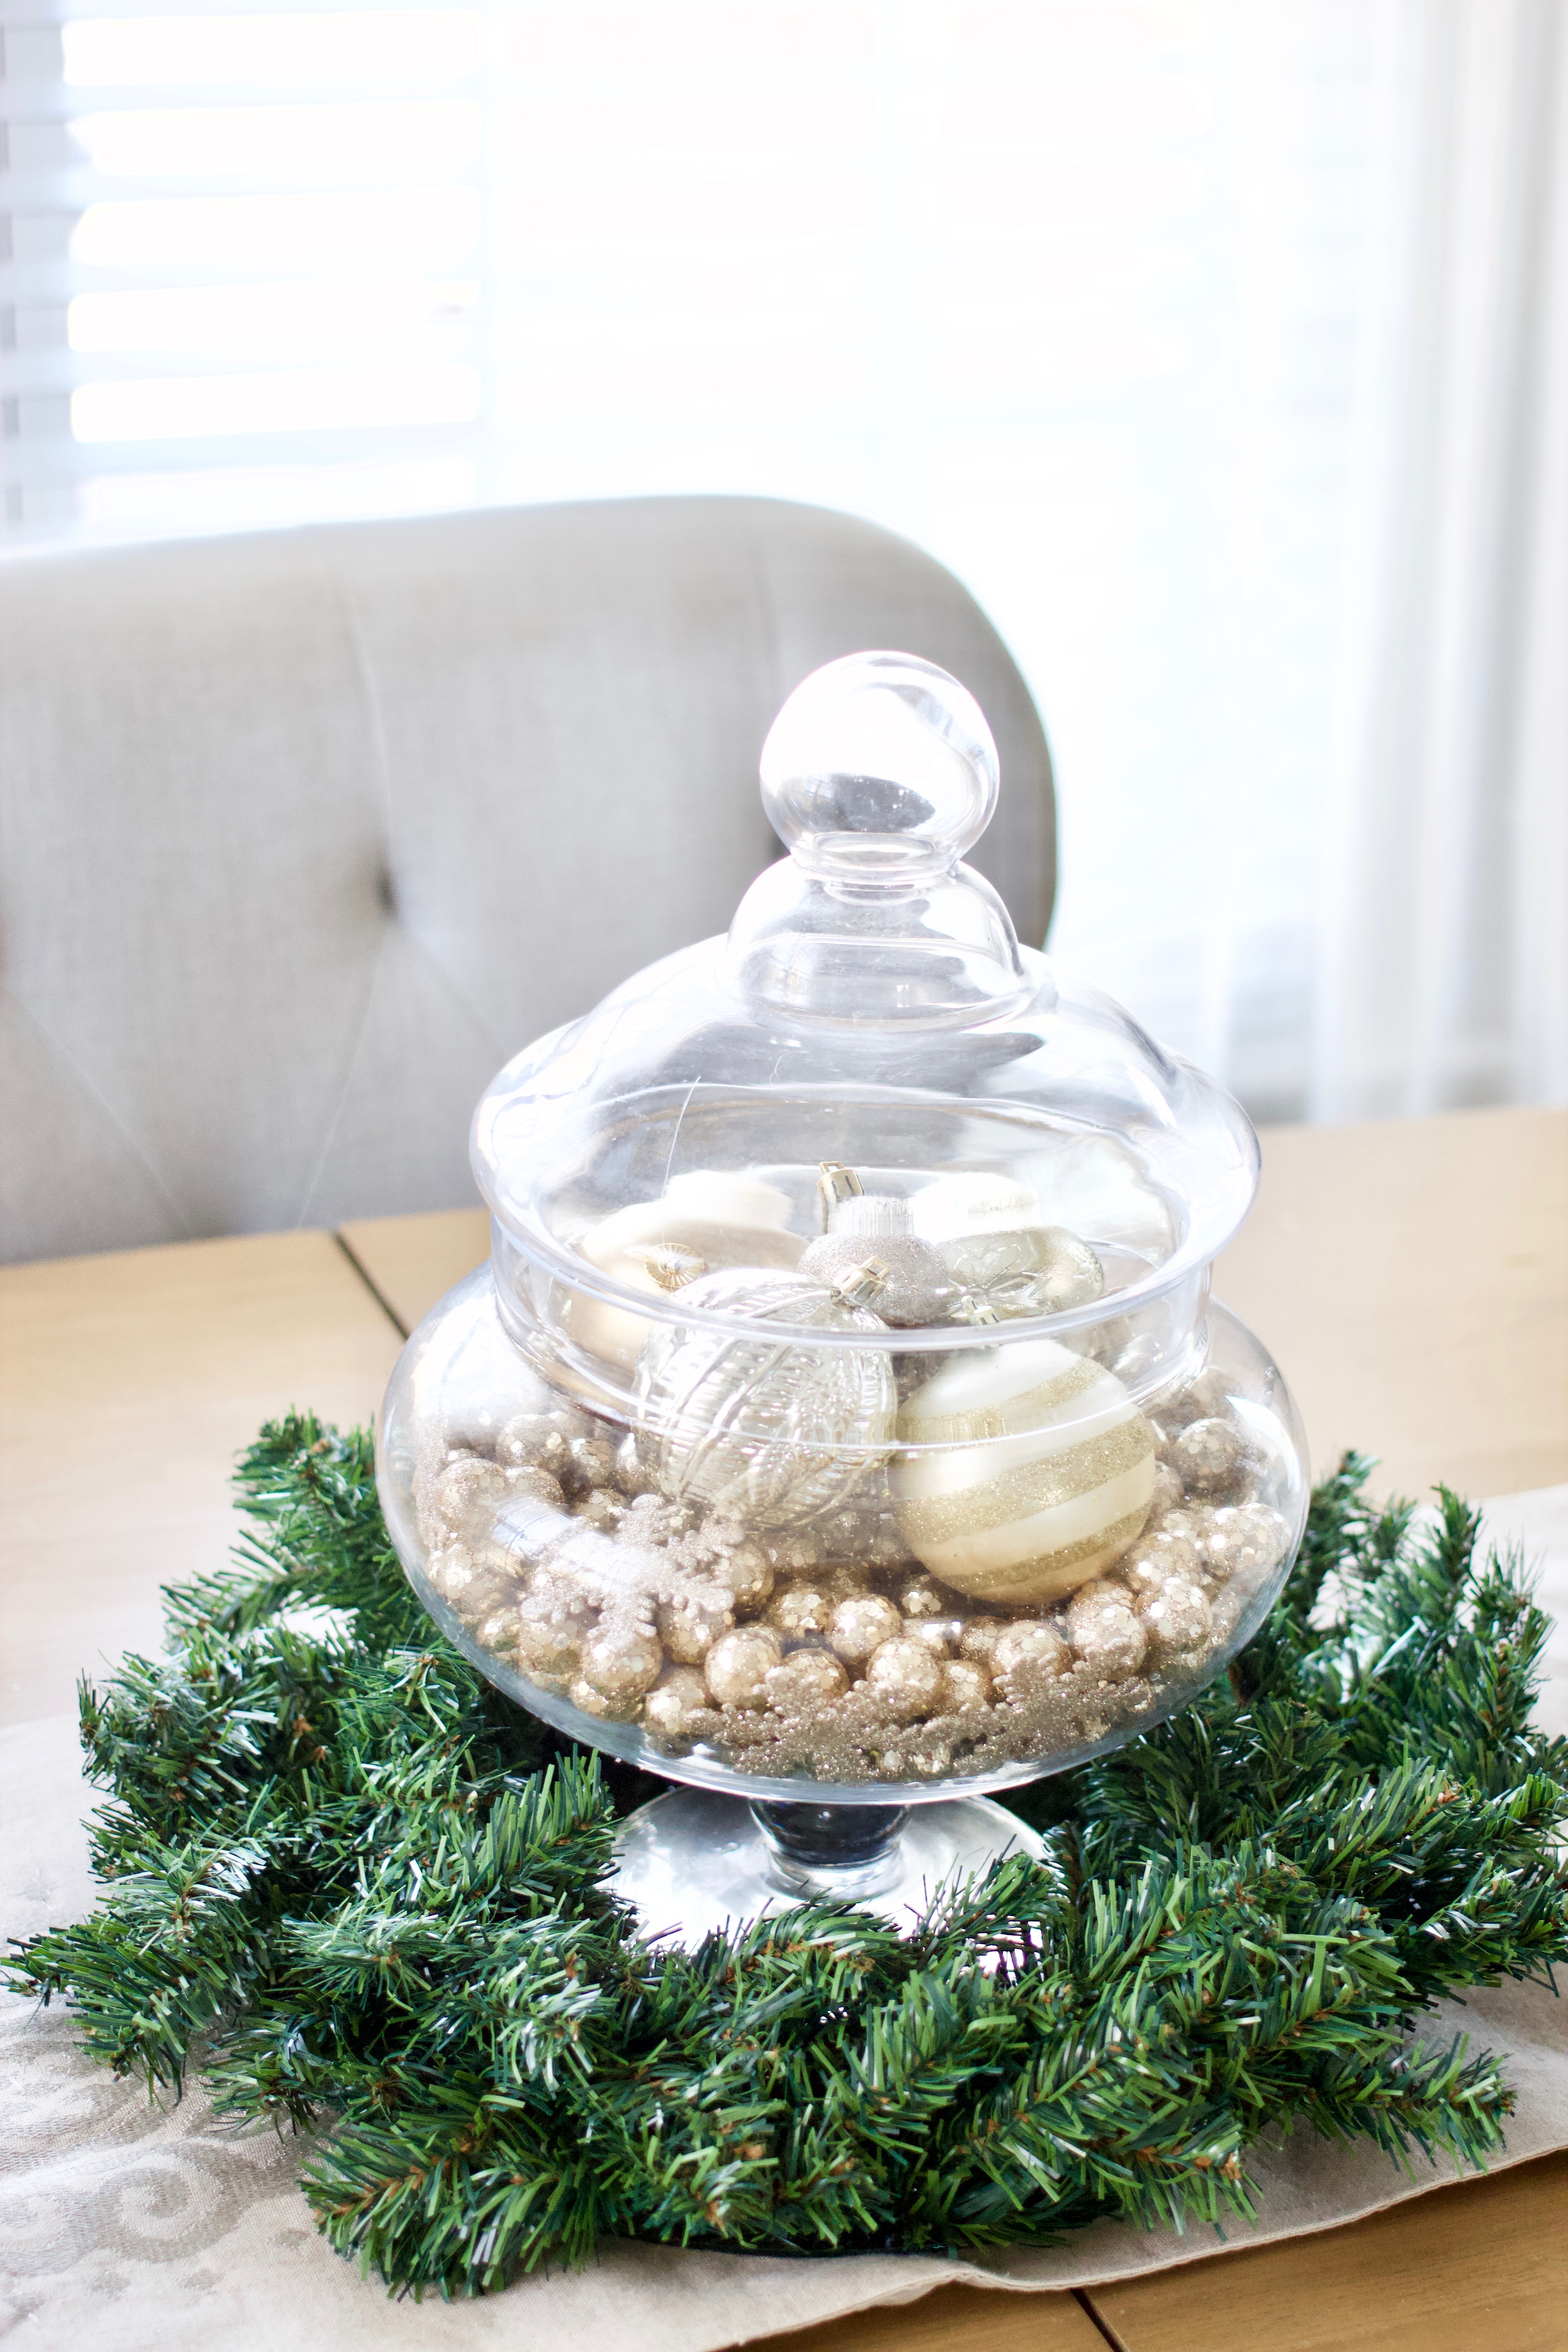 ornaments and wreath in dining room centerpiece